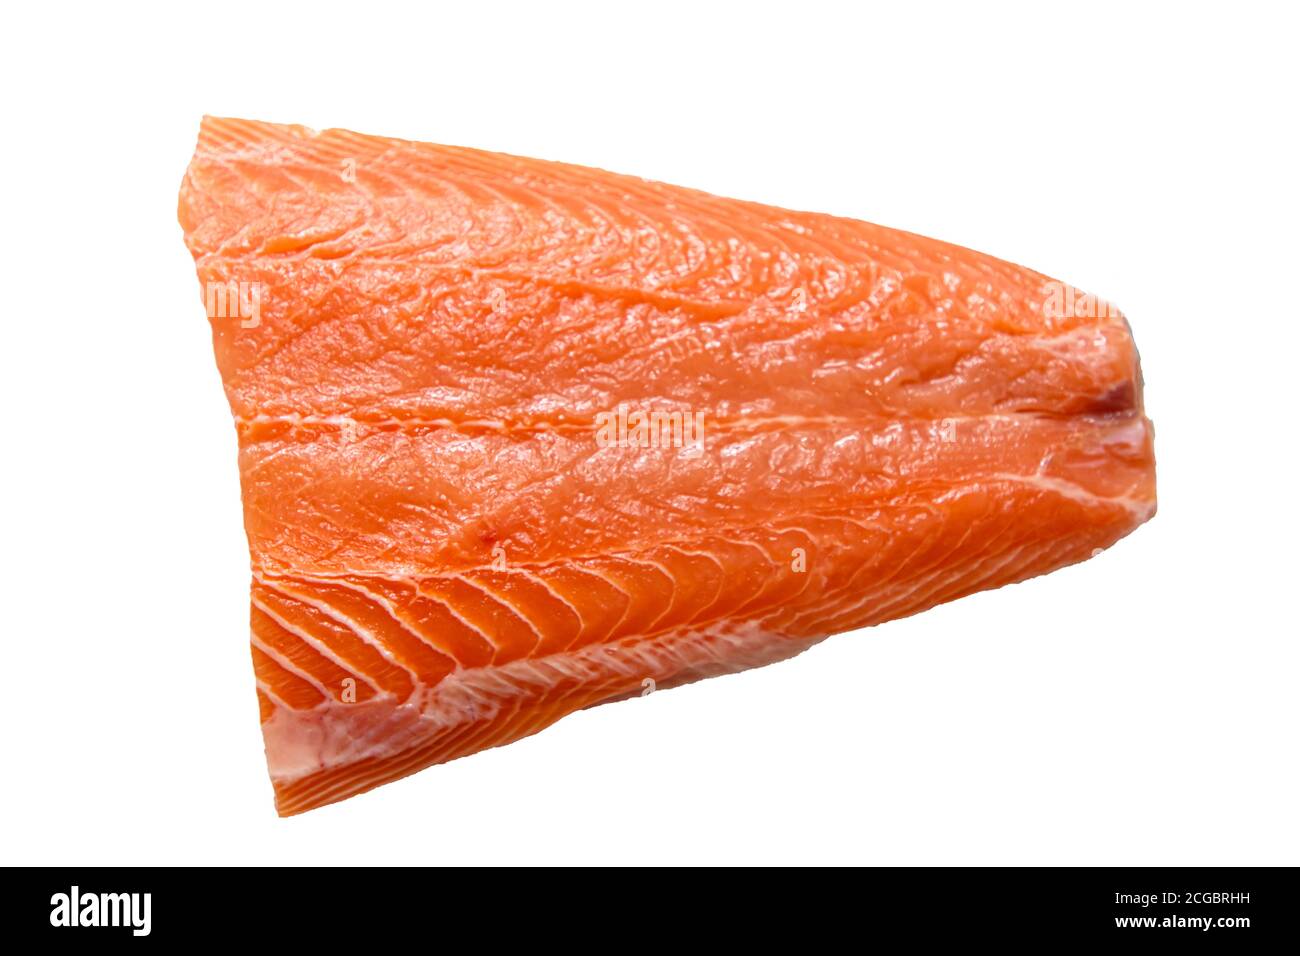 Salmon fillet, tail part is on a white background. Isolated Stock Photo